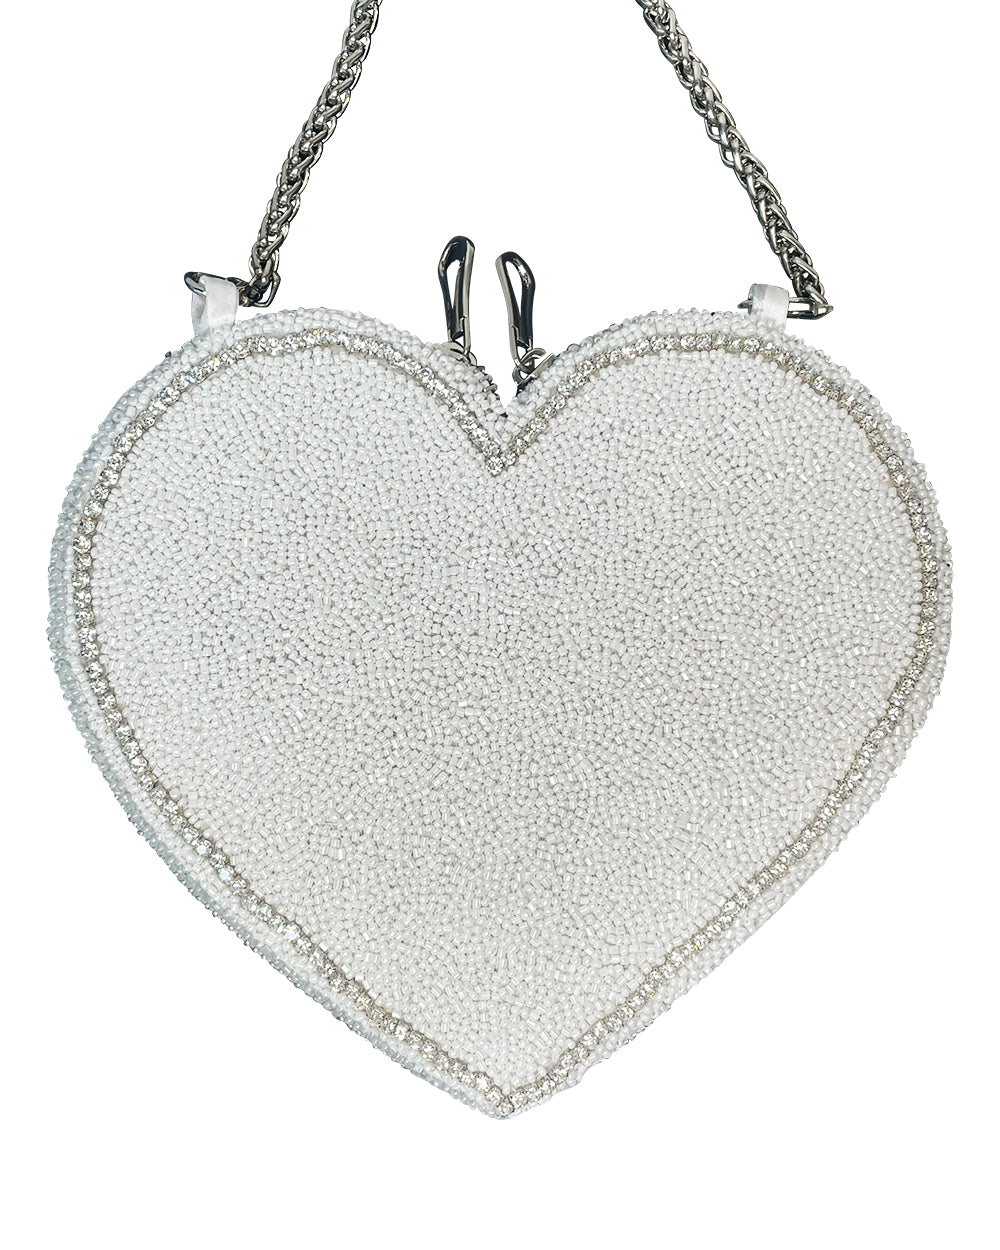 HEART BAG WHITE AND DIAMONTE - ADULT